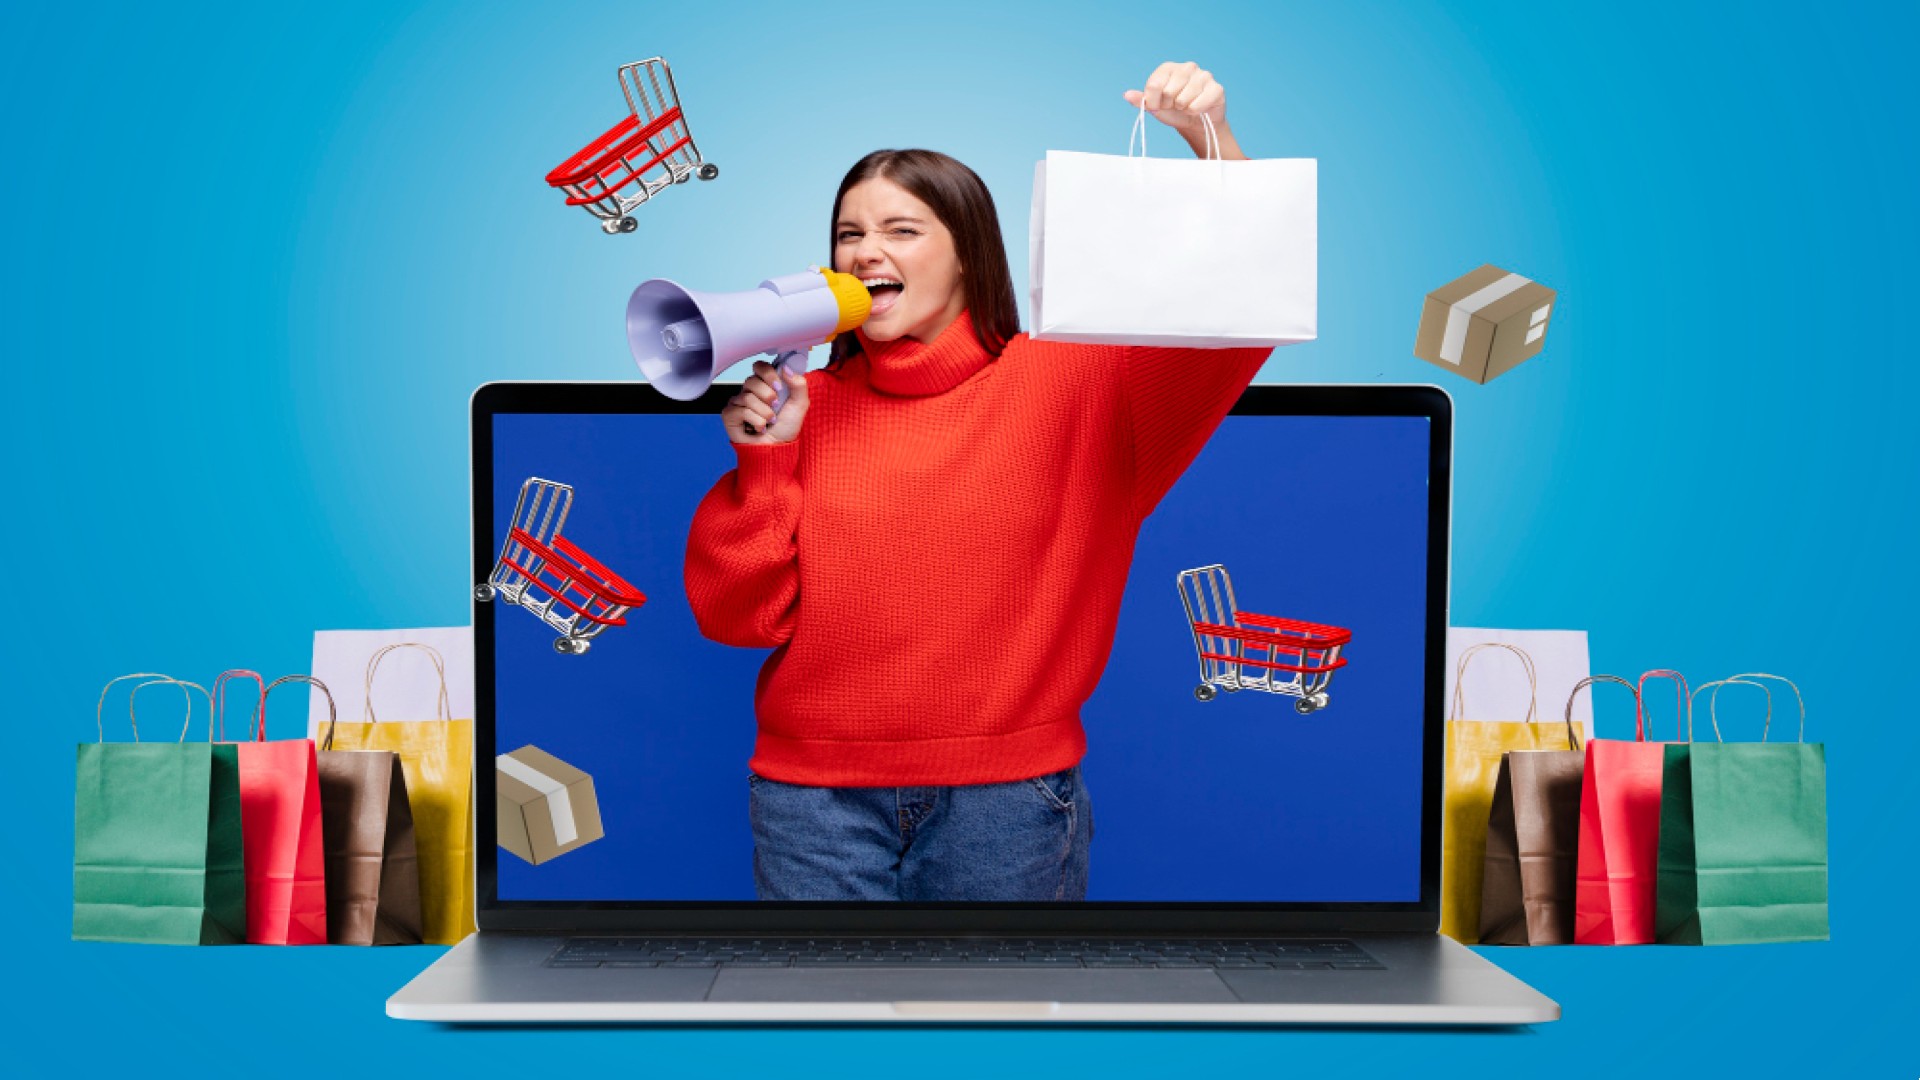 How is Data Analytics used in Online Shopping?